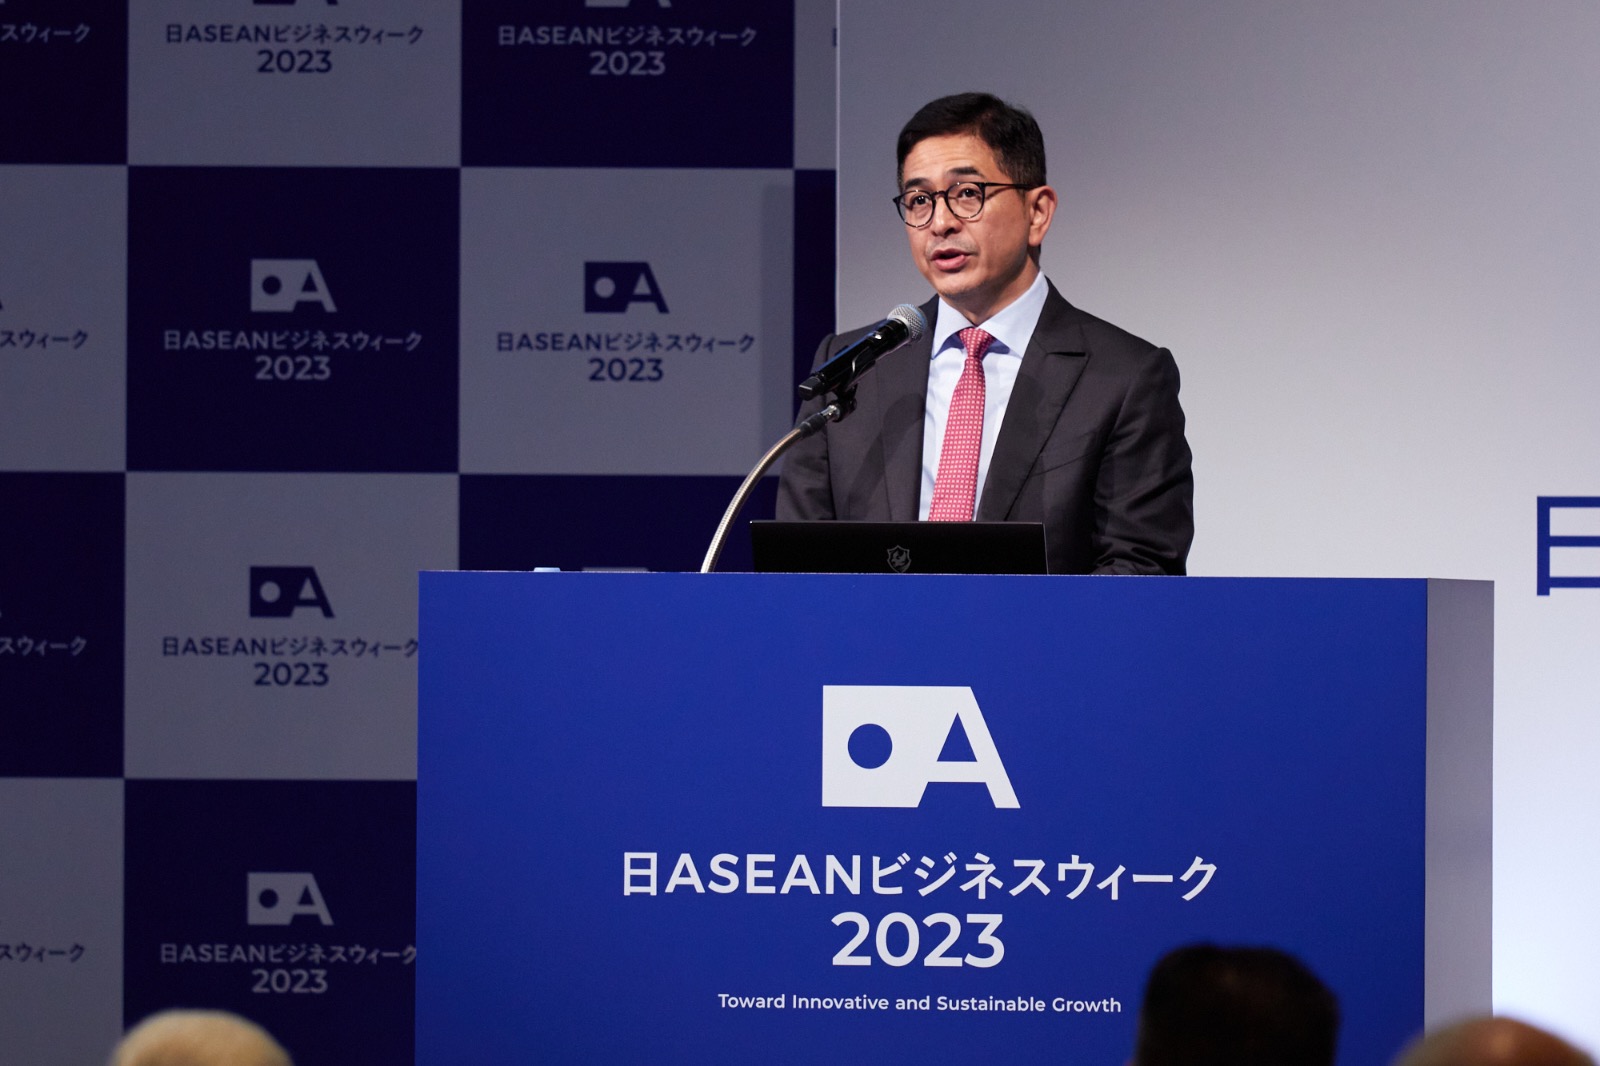 ASEAN-BAC calls for boosting trade, investment with Japan